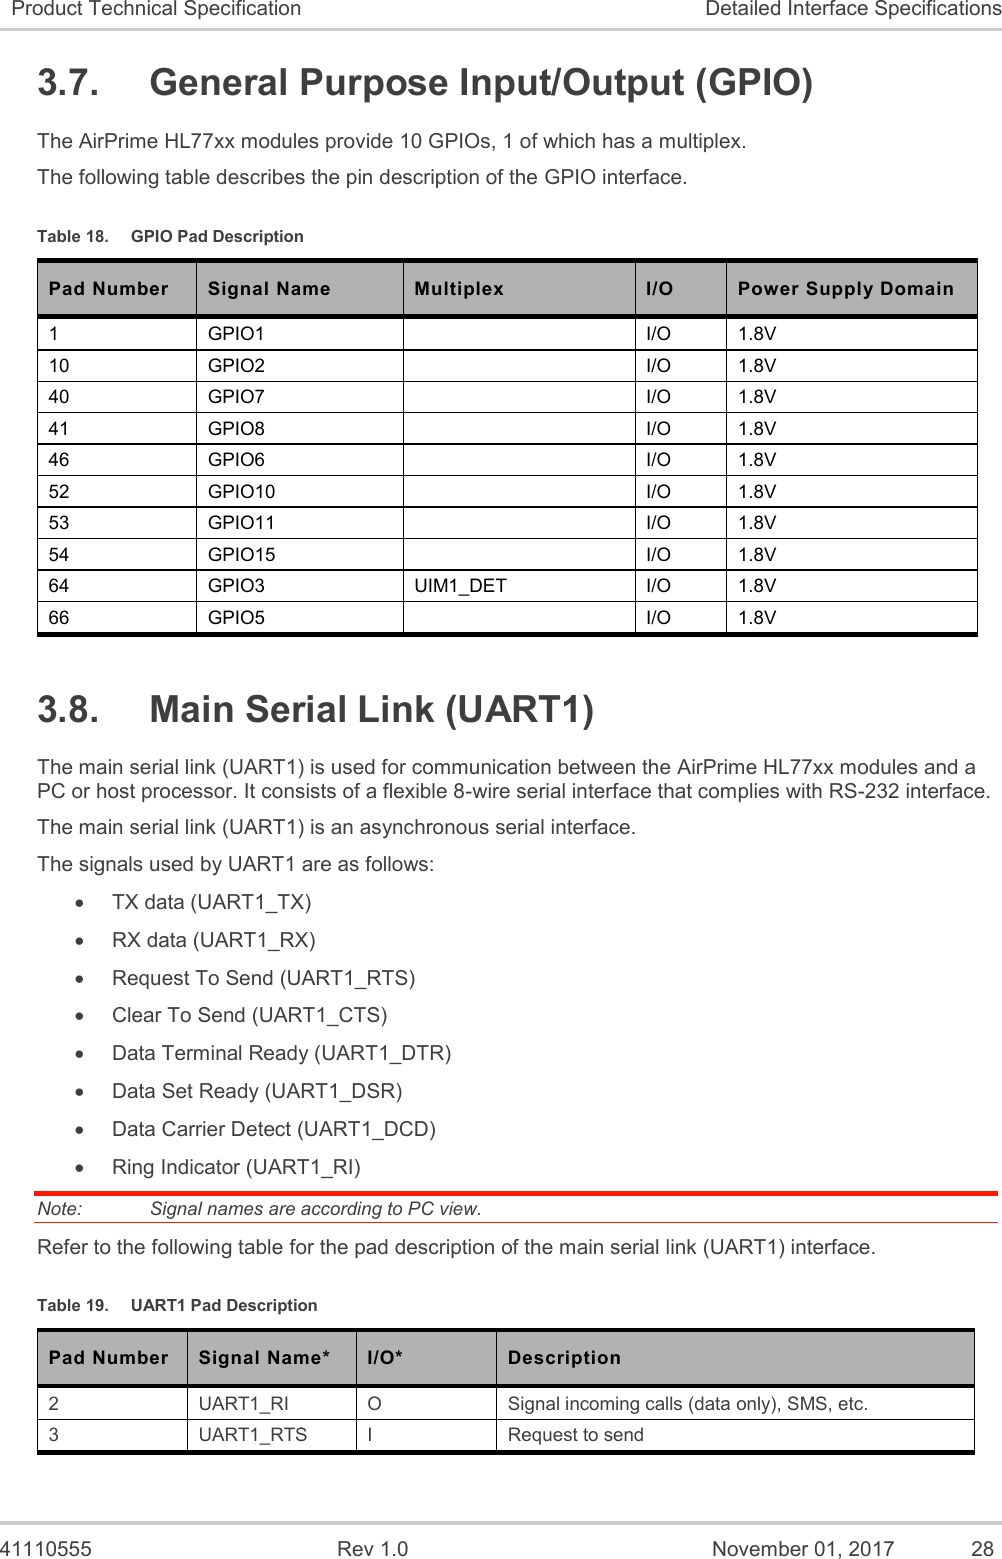   41110555  Rev 1.0  November 01, 2017  28 Product Technical Specification Detailed Interface Specifications 3.7.  General Purpose Input/Output (GPIO) The AirPrime HL77xx modules provide 10 GPIOs, 1 of which has a multiplex.  The following table describes the pin description of the GPIO interface. Table 18.  GPIO Pad Description Pad Number Signal Name Multiplex I/O Power Supply Domain 1 GPIO1  I/O 1.8V 10 GPIO2  I/O 1.8V 40 GPIO7  I/O 1.8V 41 GPIO8  I/O 1.8V 46 GPIO6  I/O 1.8V 52 GPIO10  I/O 1.8V 53 GPIO11  I/O 1.8V 54 GPIO15  I/O 1.8V 64 GPIO3 UIM1_DET I/O 1.8V 66 GPIO5  I/O 1.8V 3.8.  Main Serial Link (UART1) The main serial link (UART1) is used for communication between the AirPrime HL77xx modules and a PC or host processor. It consists of a flexible 8-wire serial interface that complies with RS-232 interface. The main serial link (UART1) is an asynchronous serial interface. The signals used by UART1 are as follows: • TX data (UART1_TX) • RX data (UART1_RX) • Request To Send (UART1_RTS) • Clear To Send (UART1_CTS) • Data Terminal Ready (UART1_DTR) • Data Set Ready (UART1_DSR) • Data Carrier Detect (UART1_DCD) • Ring Indicator (UART1_RI) Note:   Signal names are according to PC view. Refer to the following table for the pad description of the main serial link (UART1) interface. Table 19.  UART1 Pad Description Pad Number Signal Name* I/O* Description 2 UART1_RI O Signal incoming calls (data only), SMS, etc. 3 UART1_RTS I Request to send  